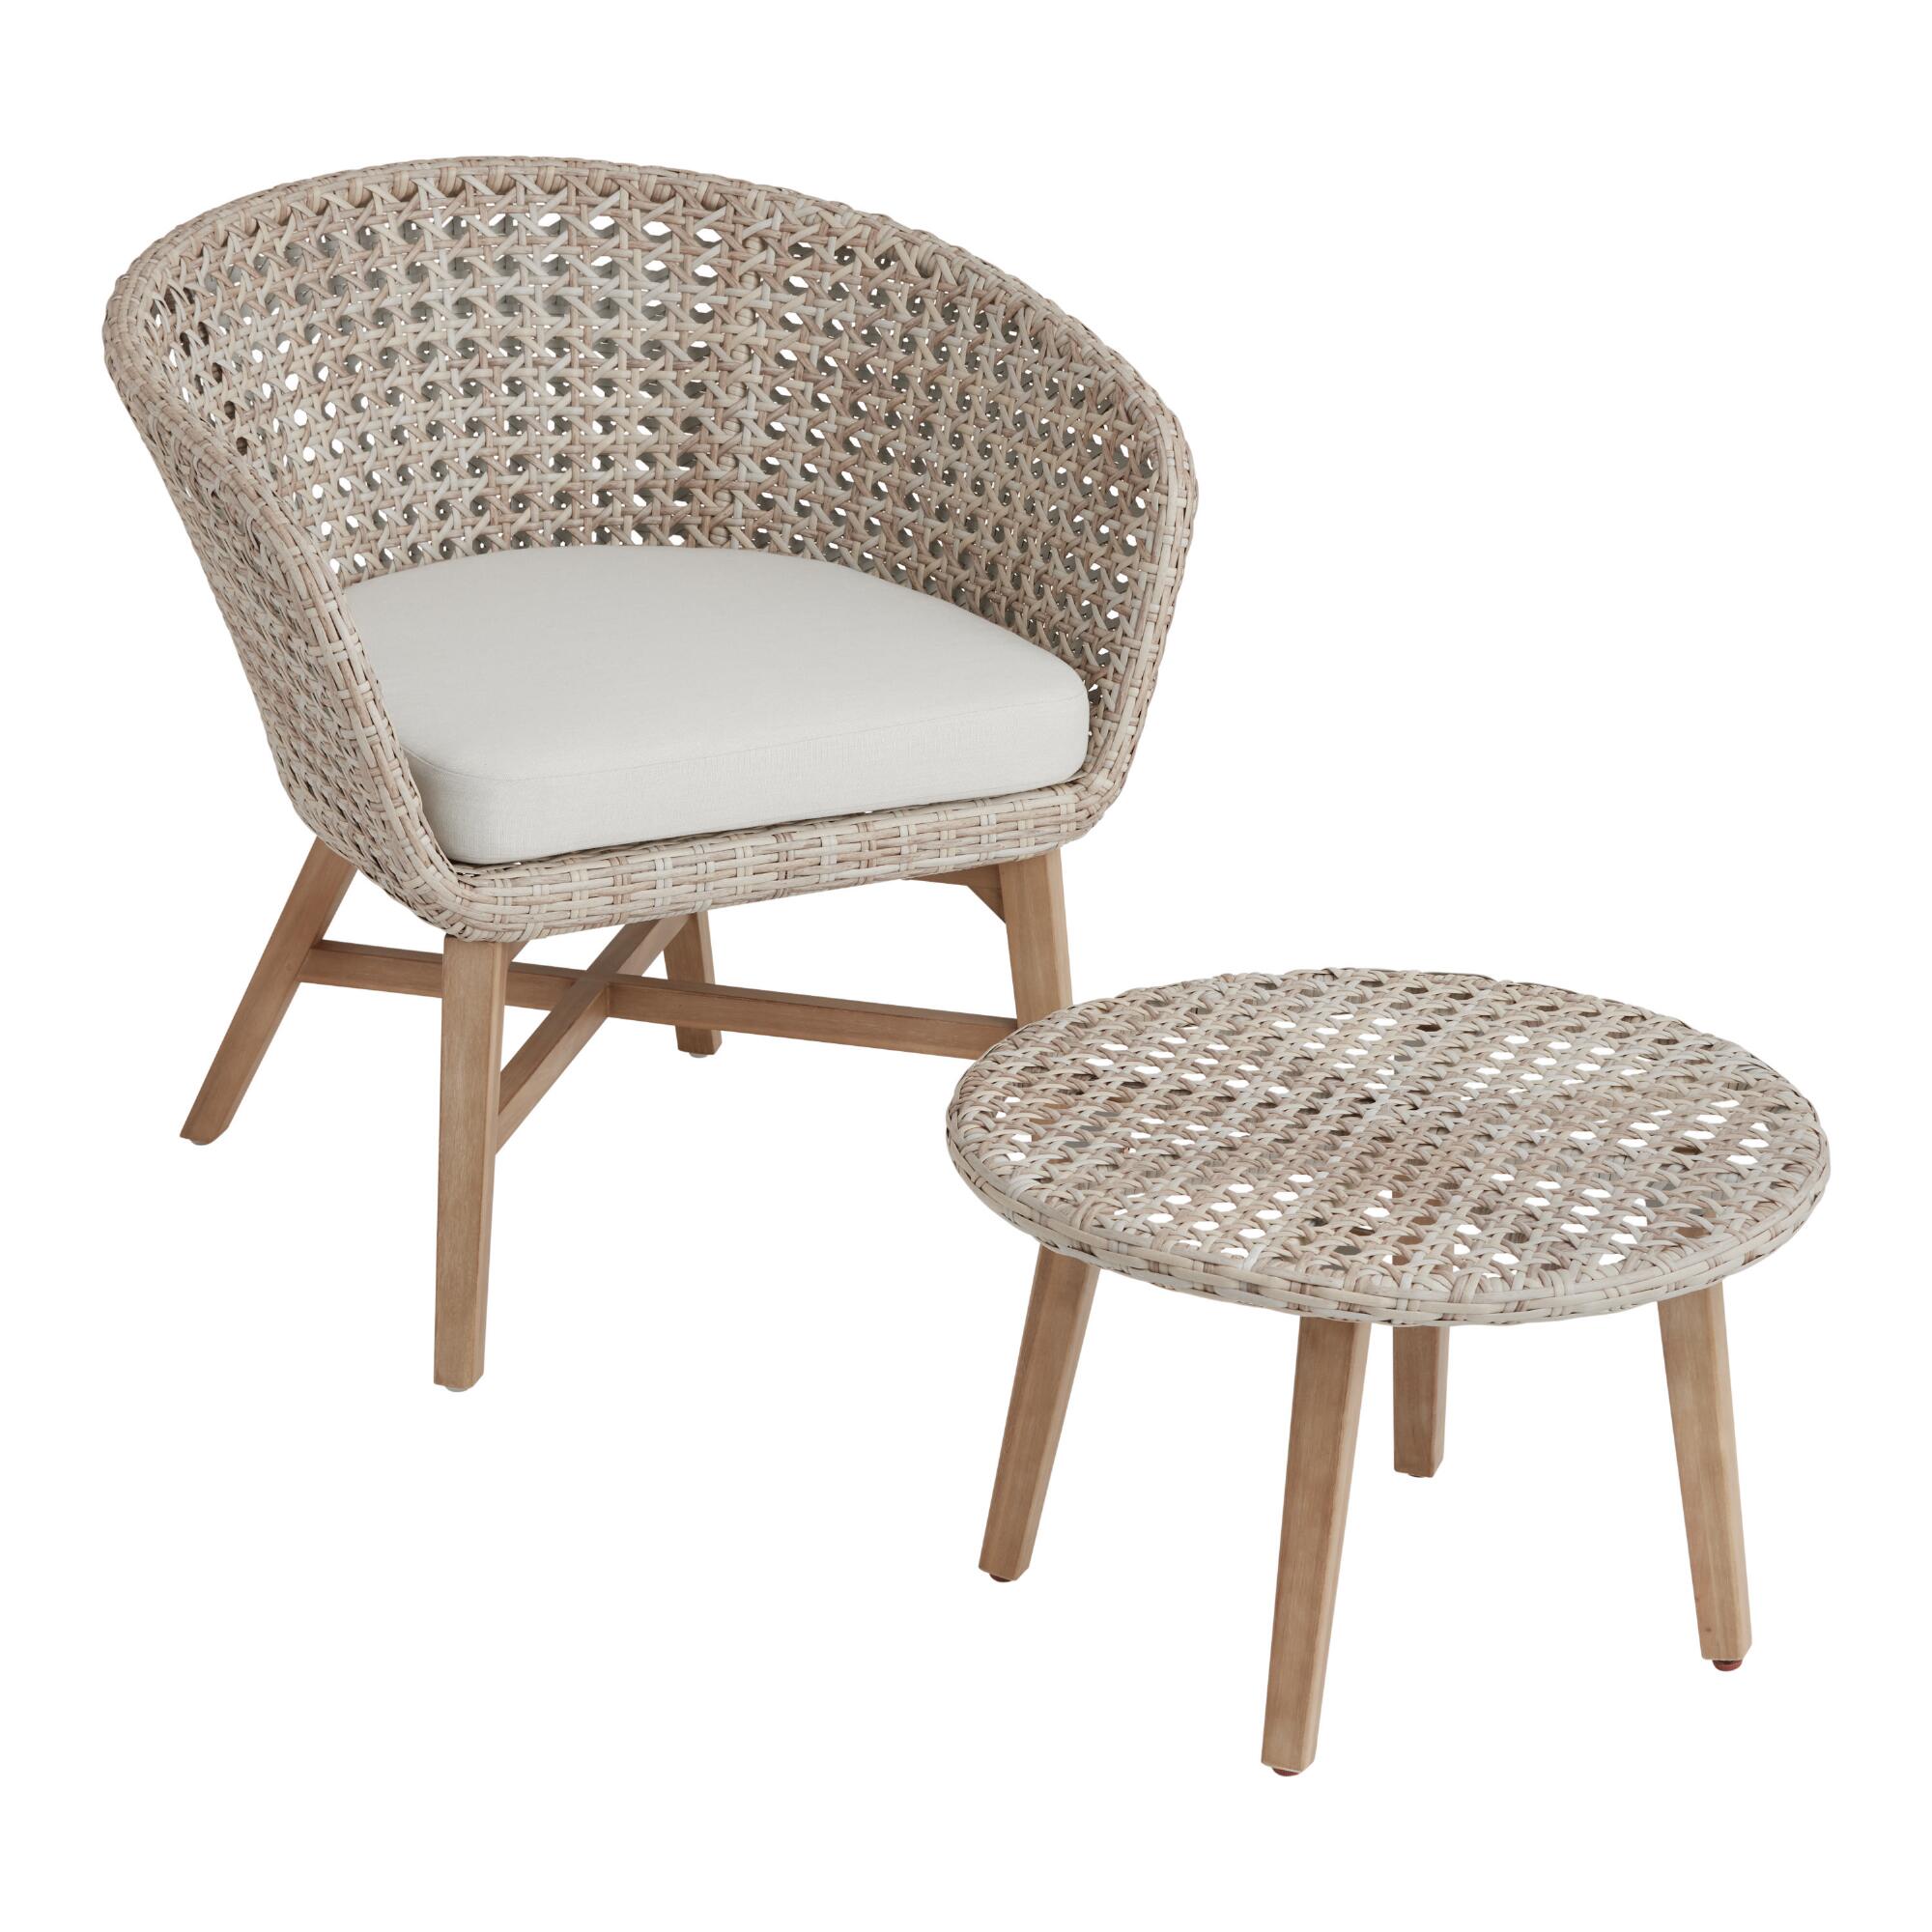 All Weather Wicker Kandis Outdoor Patio Furniture Collection by World Market